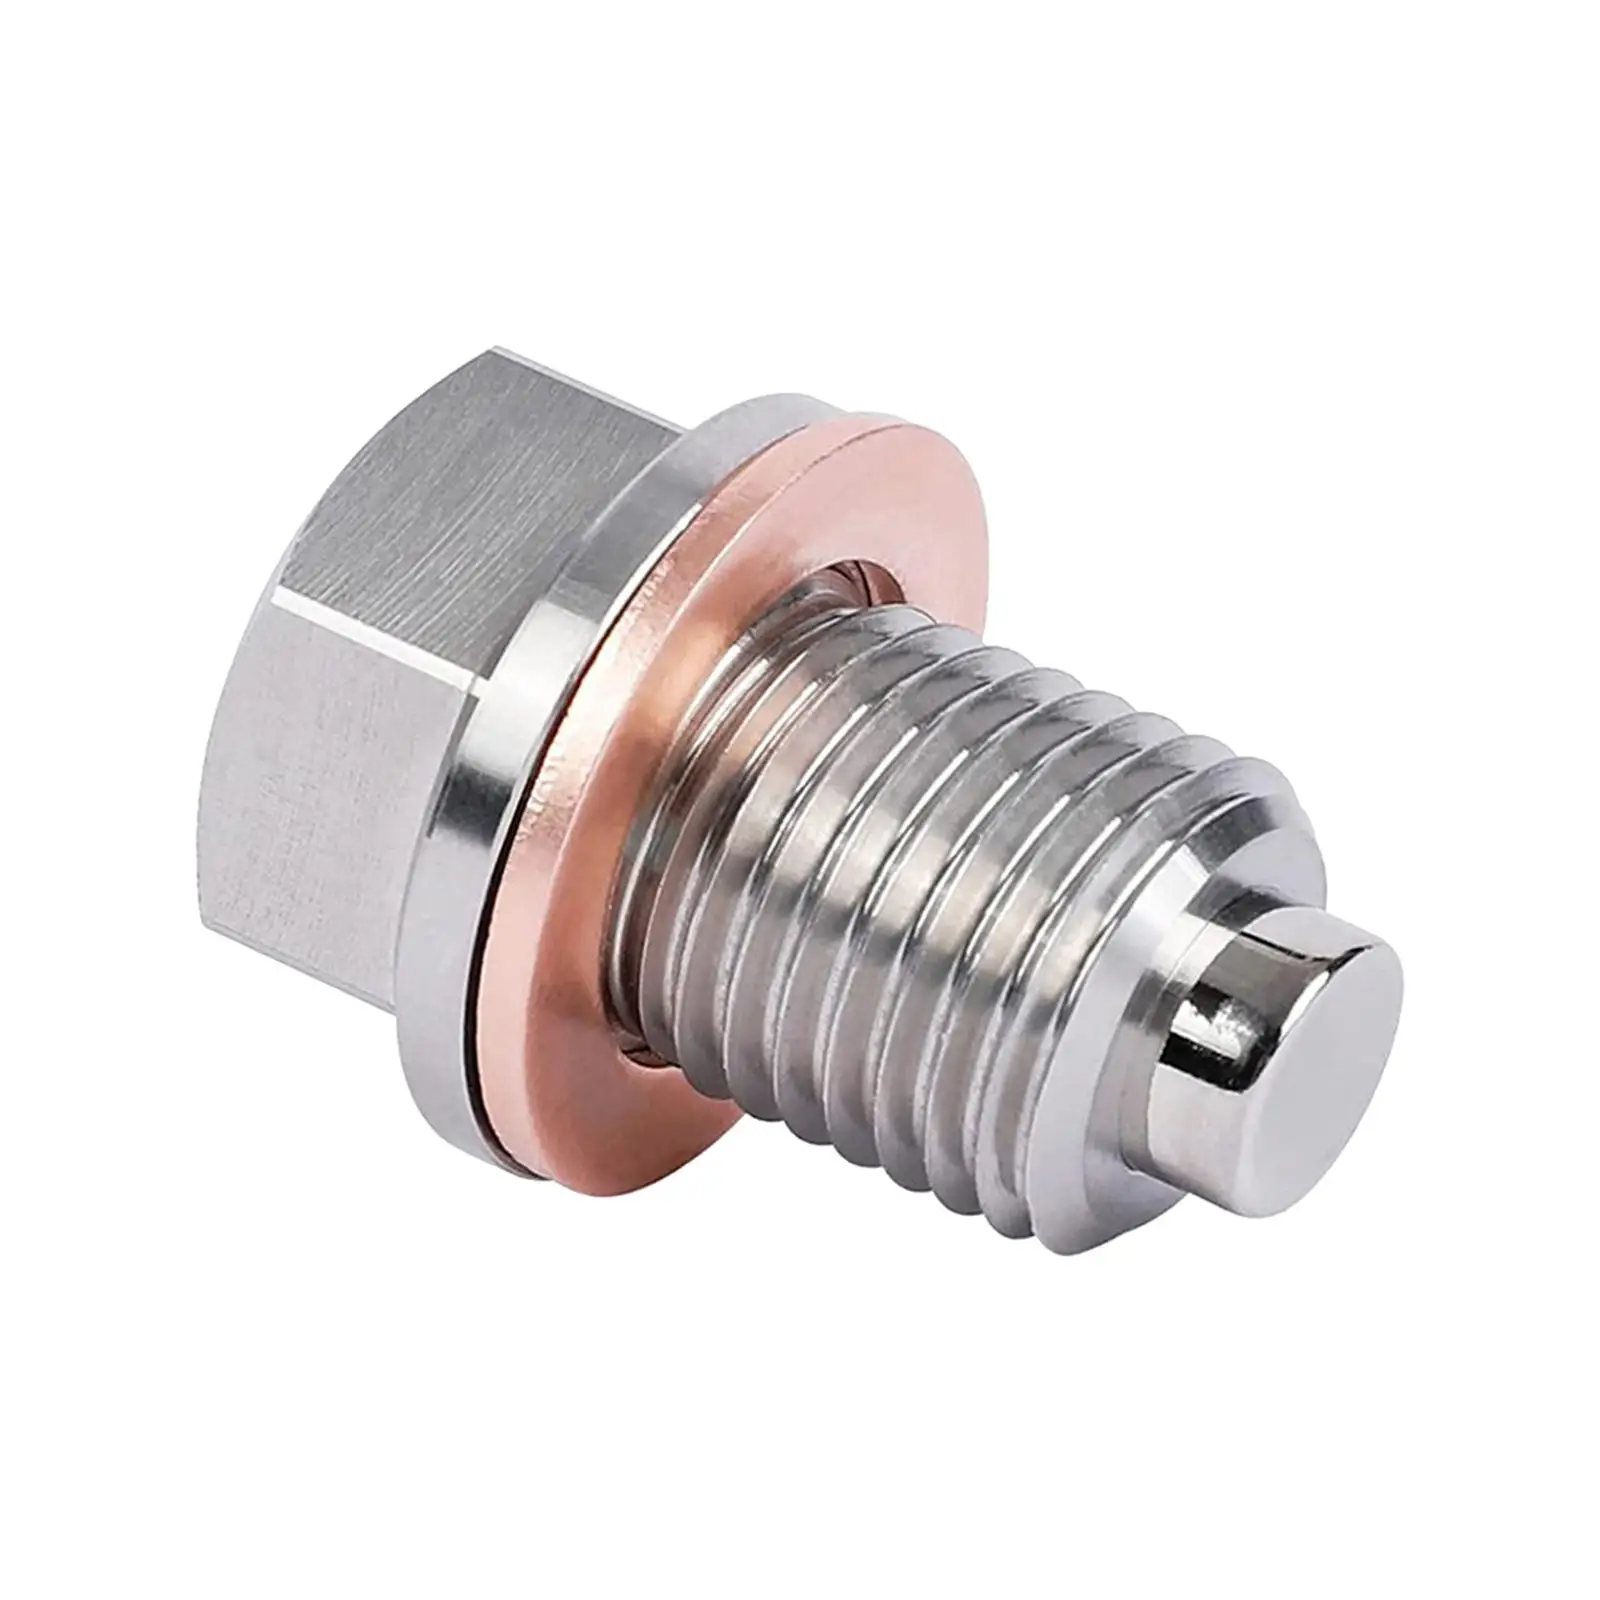 Oil Pan Drain Plug M12x1.5 Accessories Install Faster Heavy Duty Oil Pan Plug Replacement Neodymium Magnet Bolt for Car